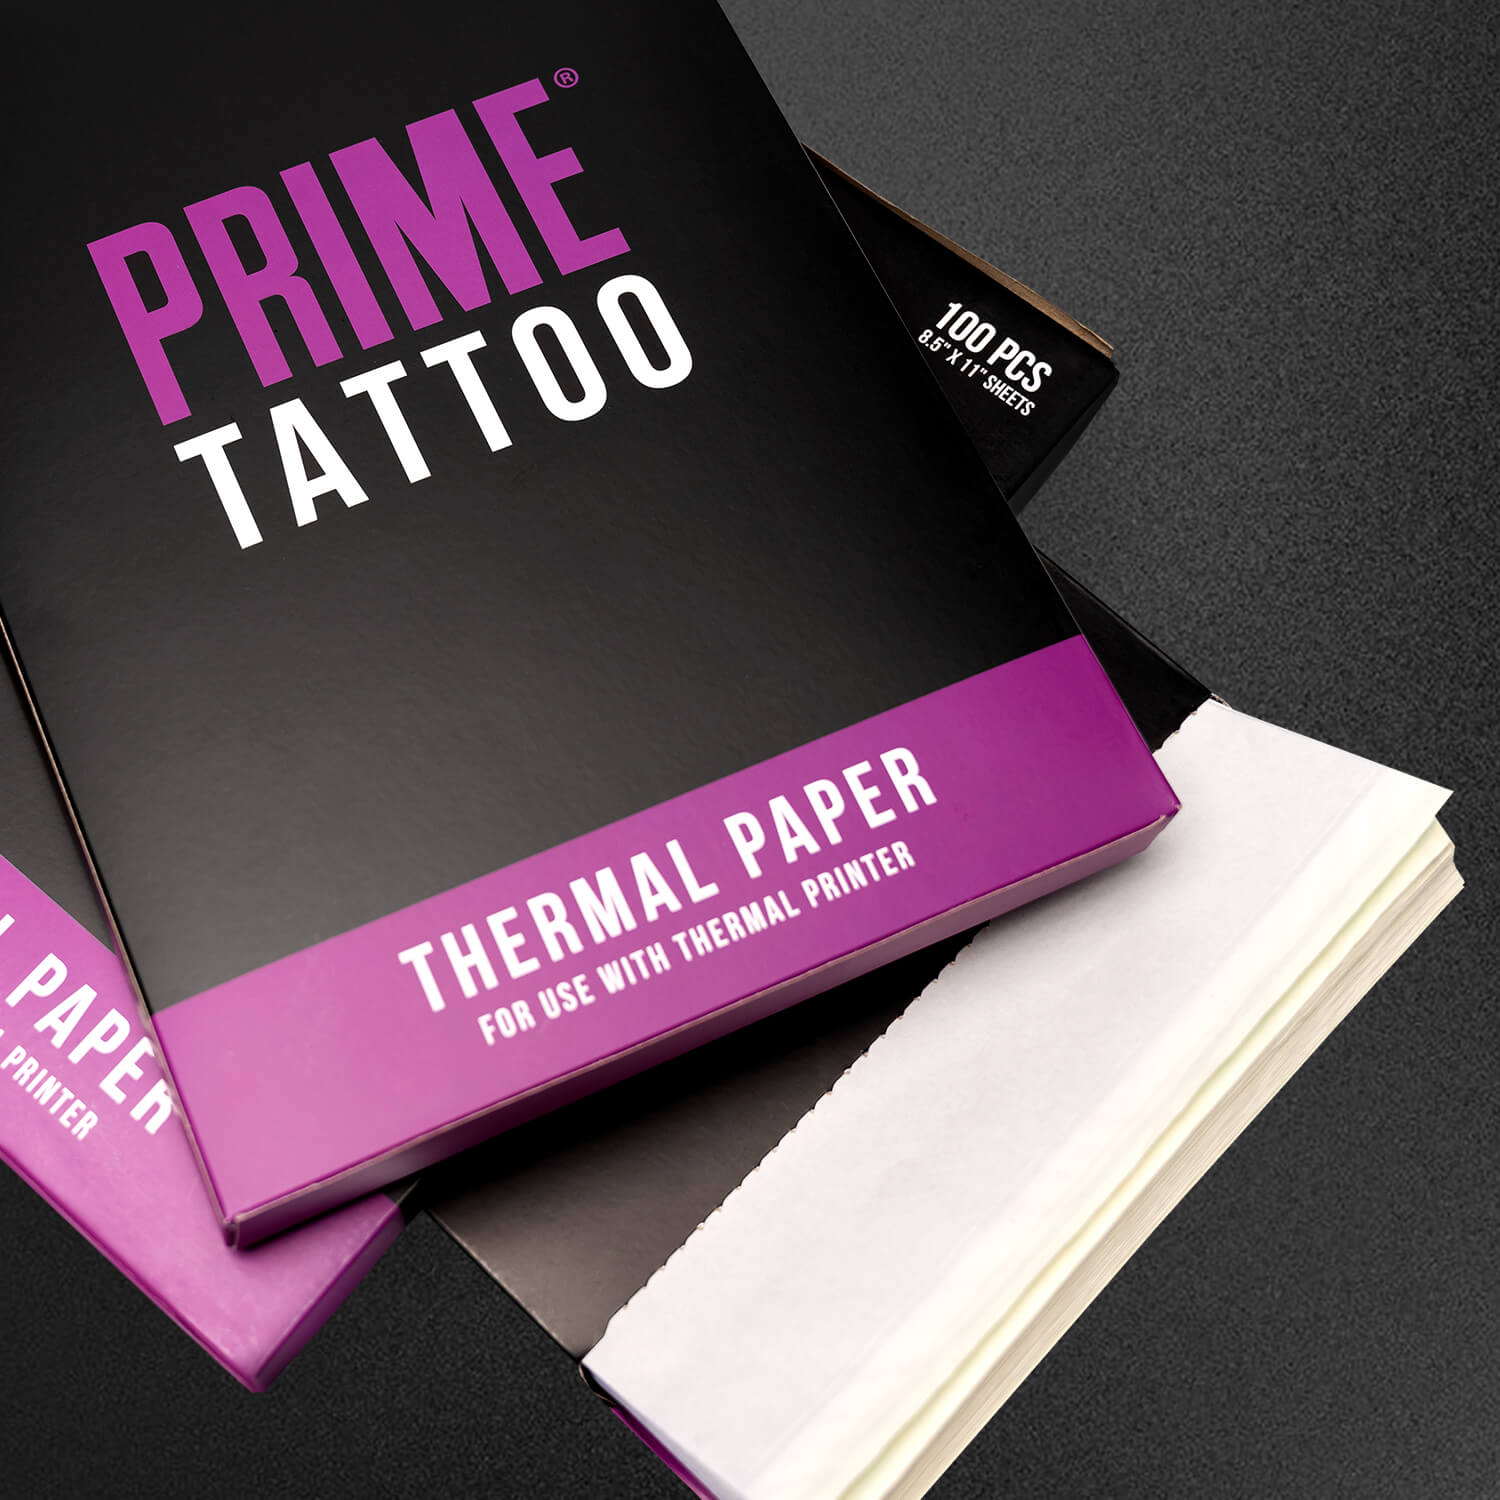 Prime Tattoo Thermal Transfer Paper is a high quality paper for lasting tattoo stencils. 